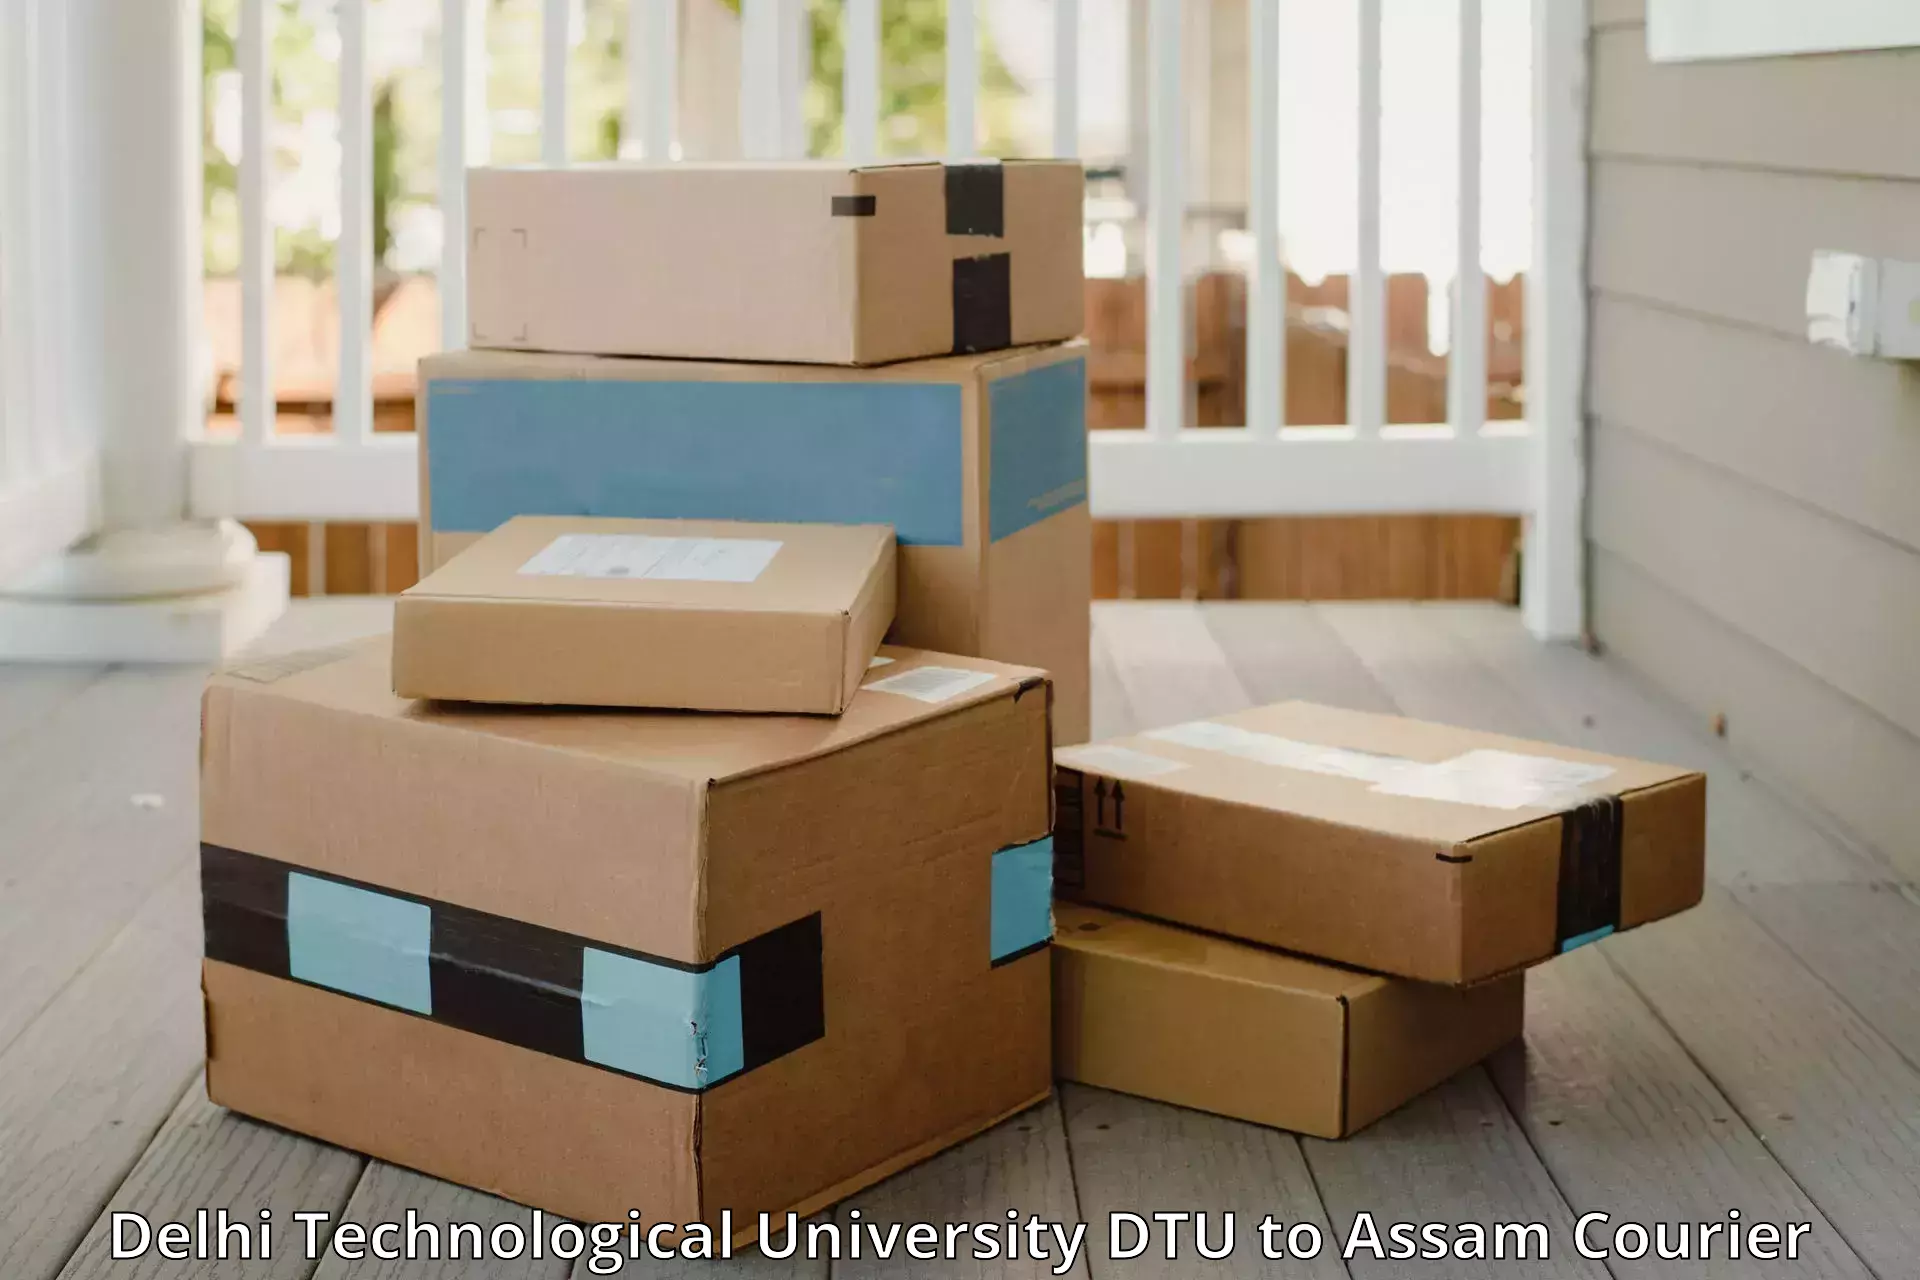 Reliable baggage delivery in Delhi Technological University DTU to Tezpur University